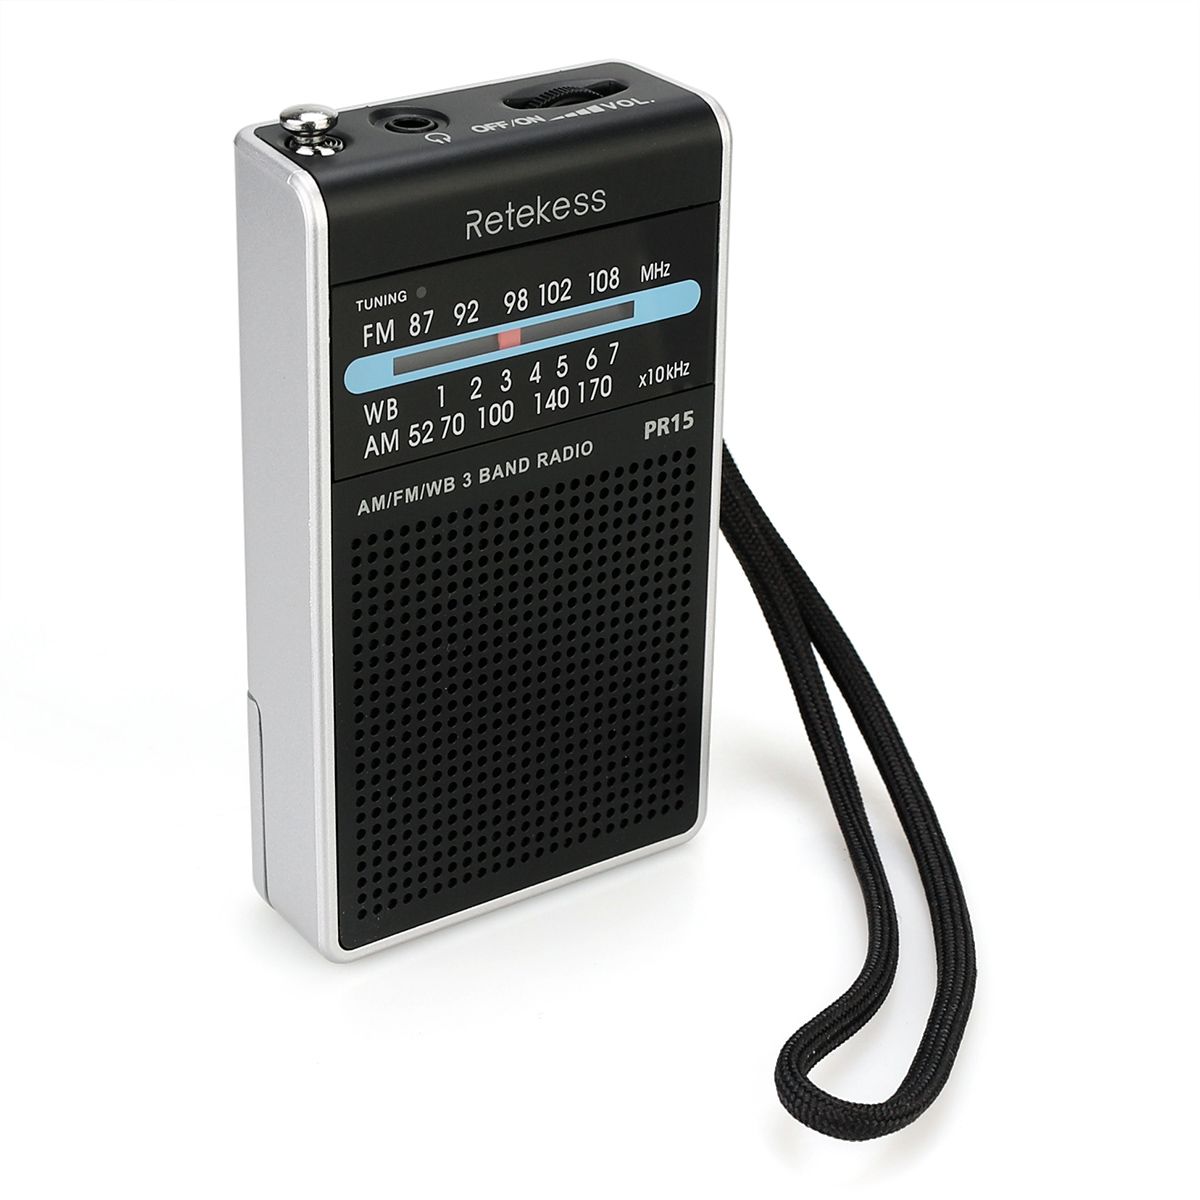 Retekess-F9214-PR15-Digital-Display-Radio-with-FM-AM-for-Family-Camping-Outdoor-1448812